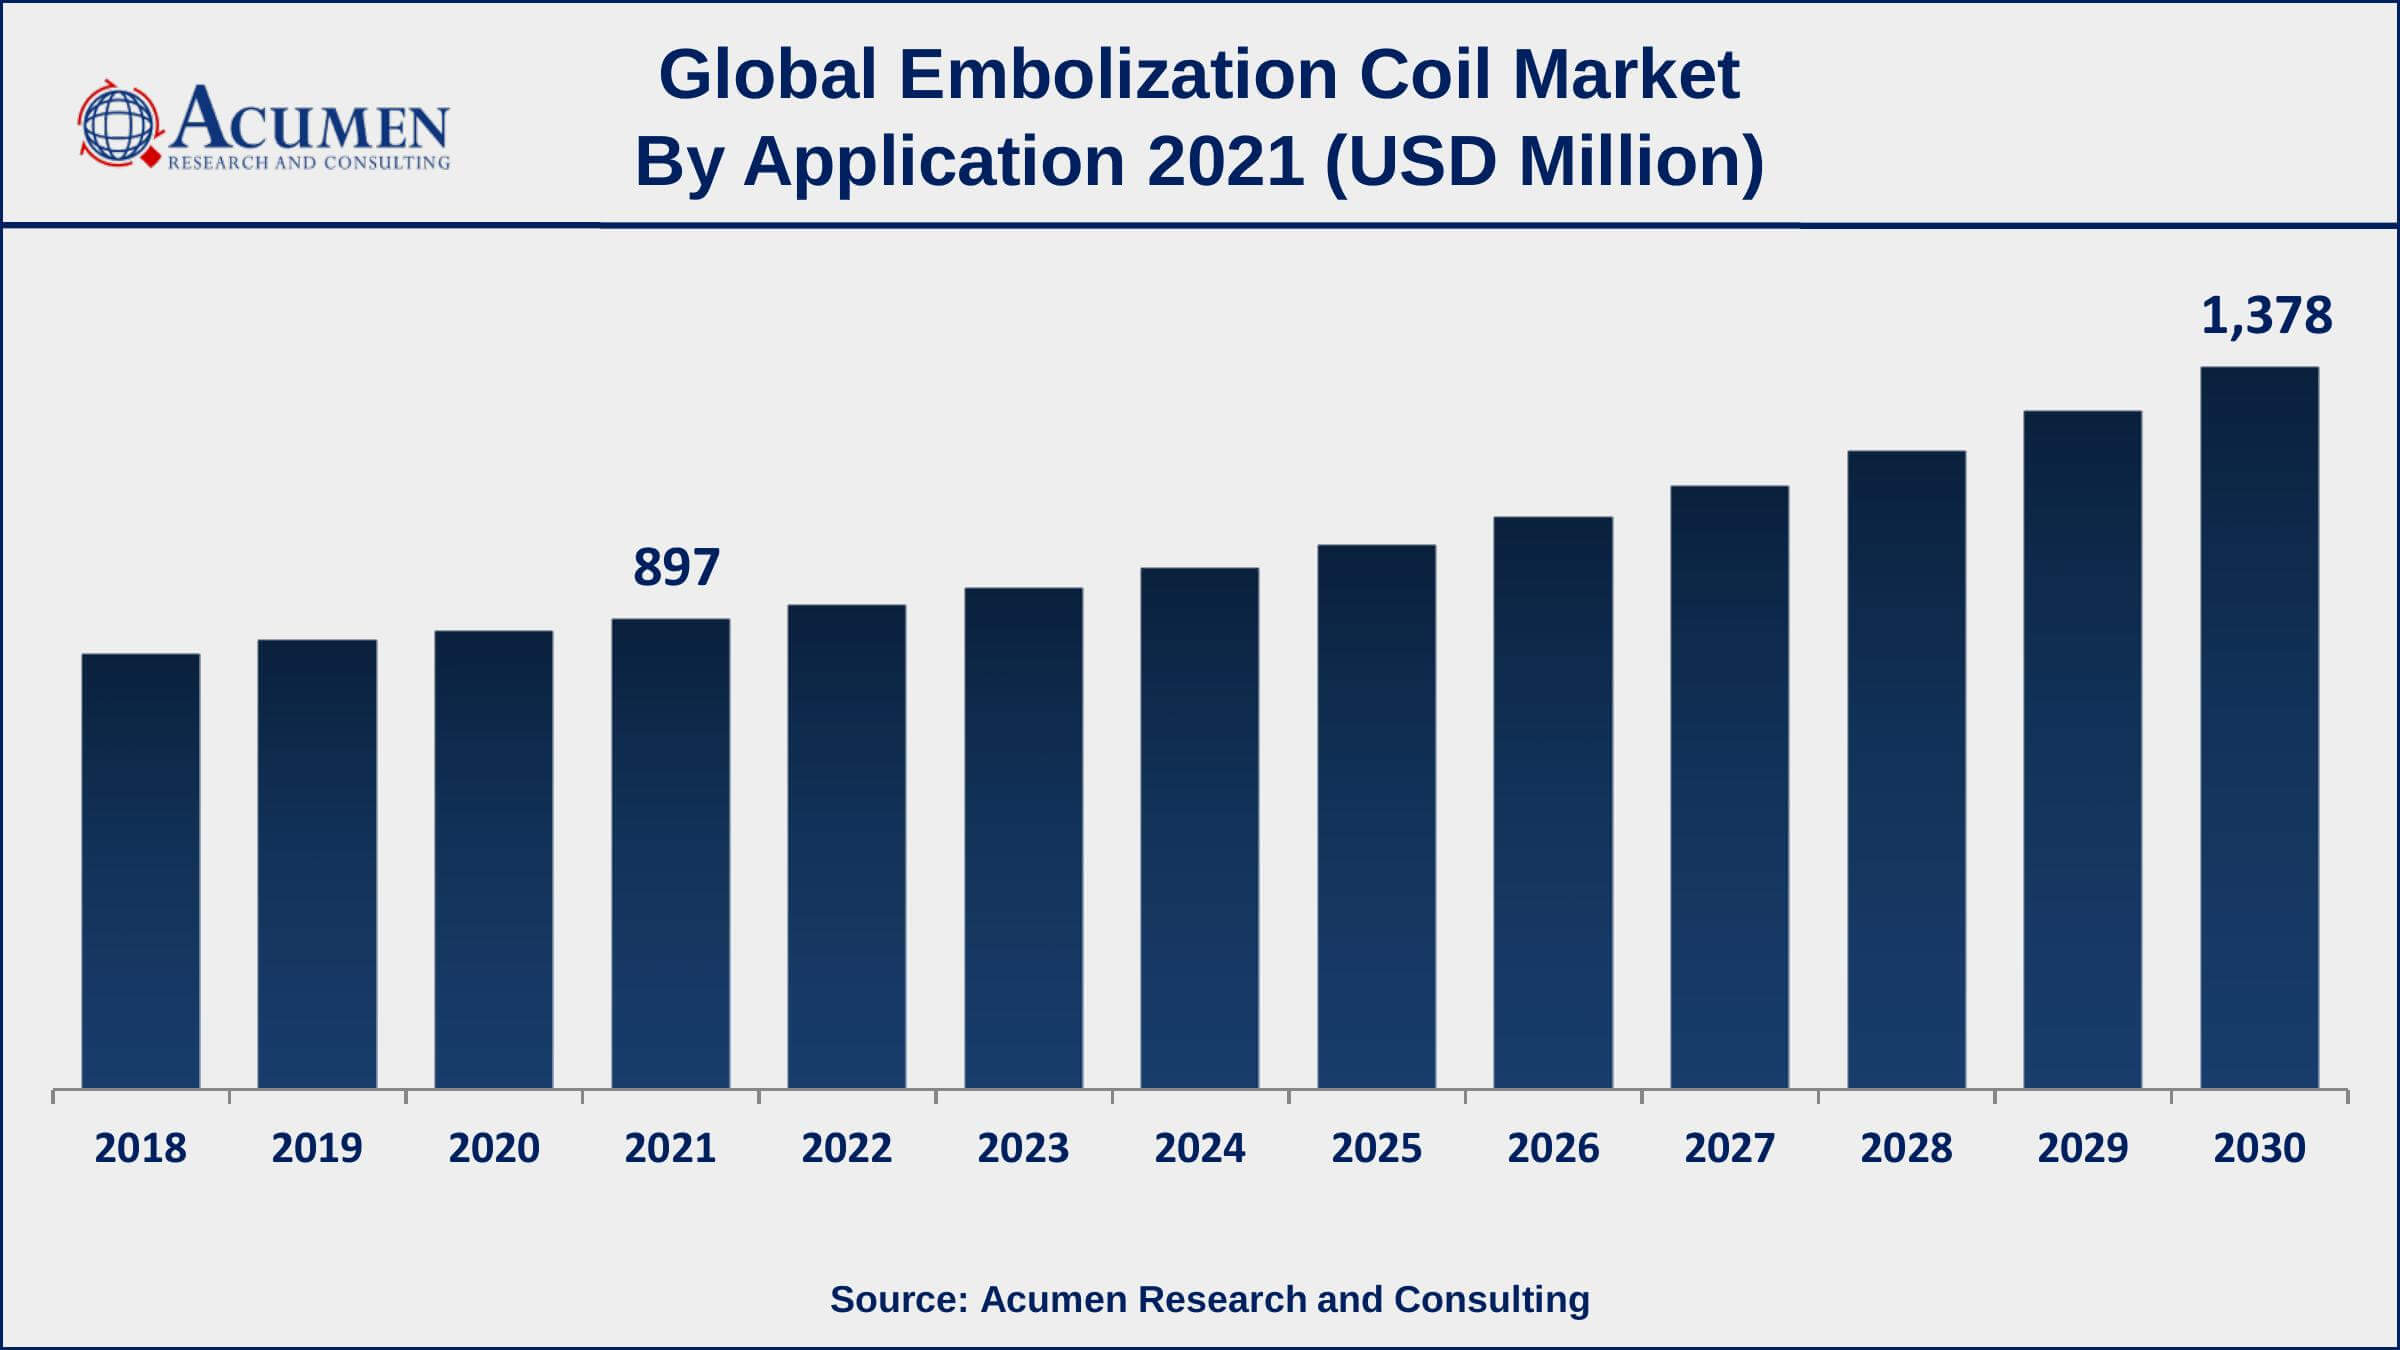 Asia-Pacific embolization coil market growth will observe strongest CAGR from 2022 to 2030